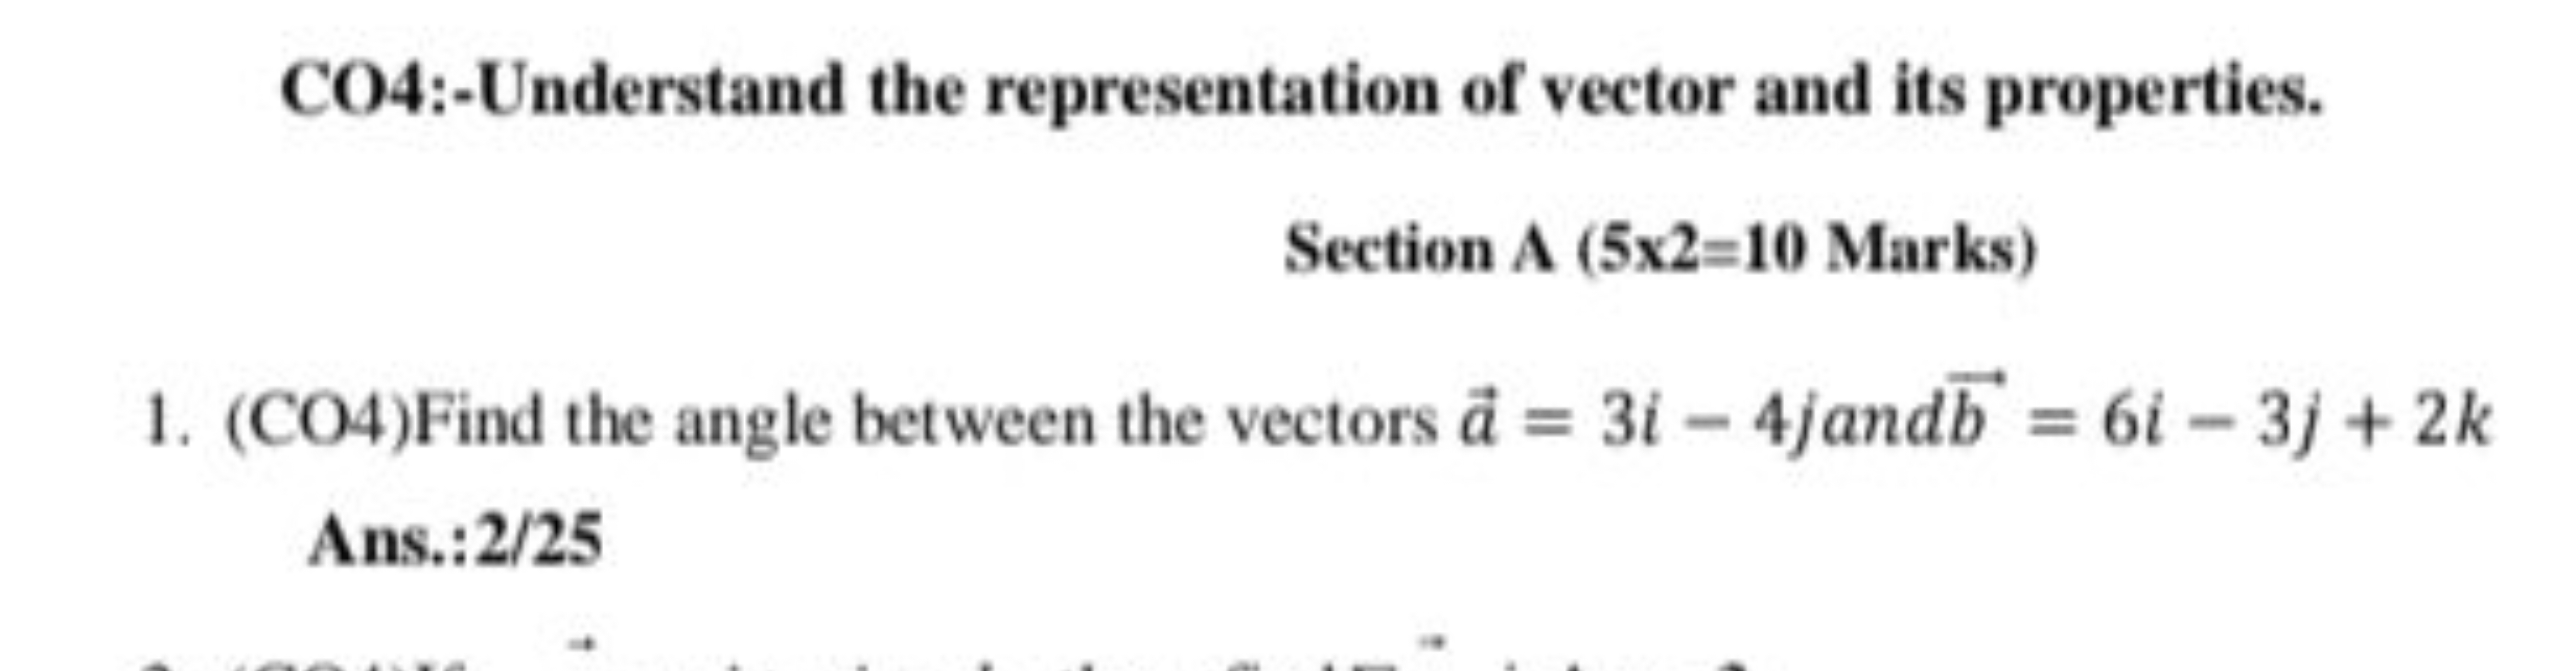 CO4:-Understand the representation of vector and its properties.
Secti